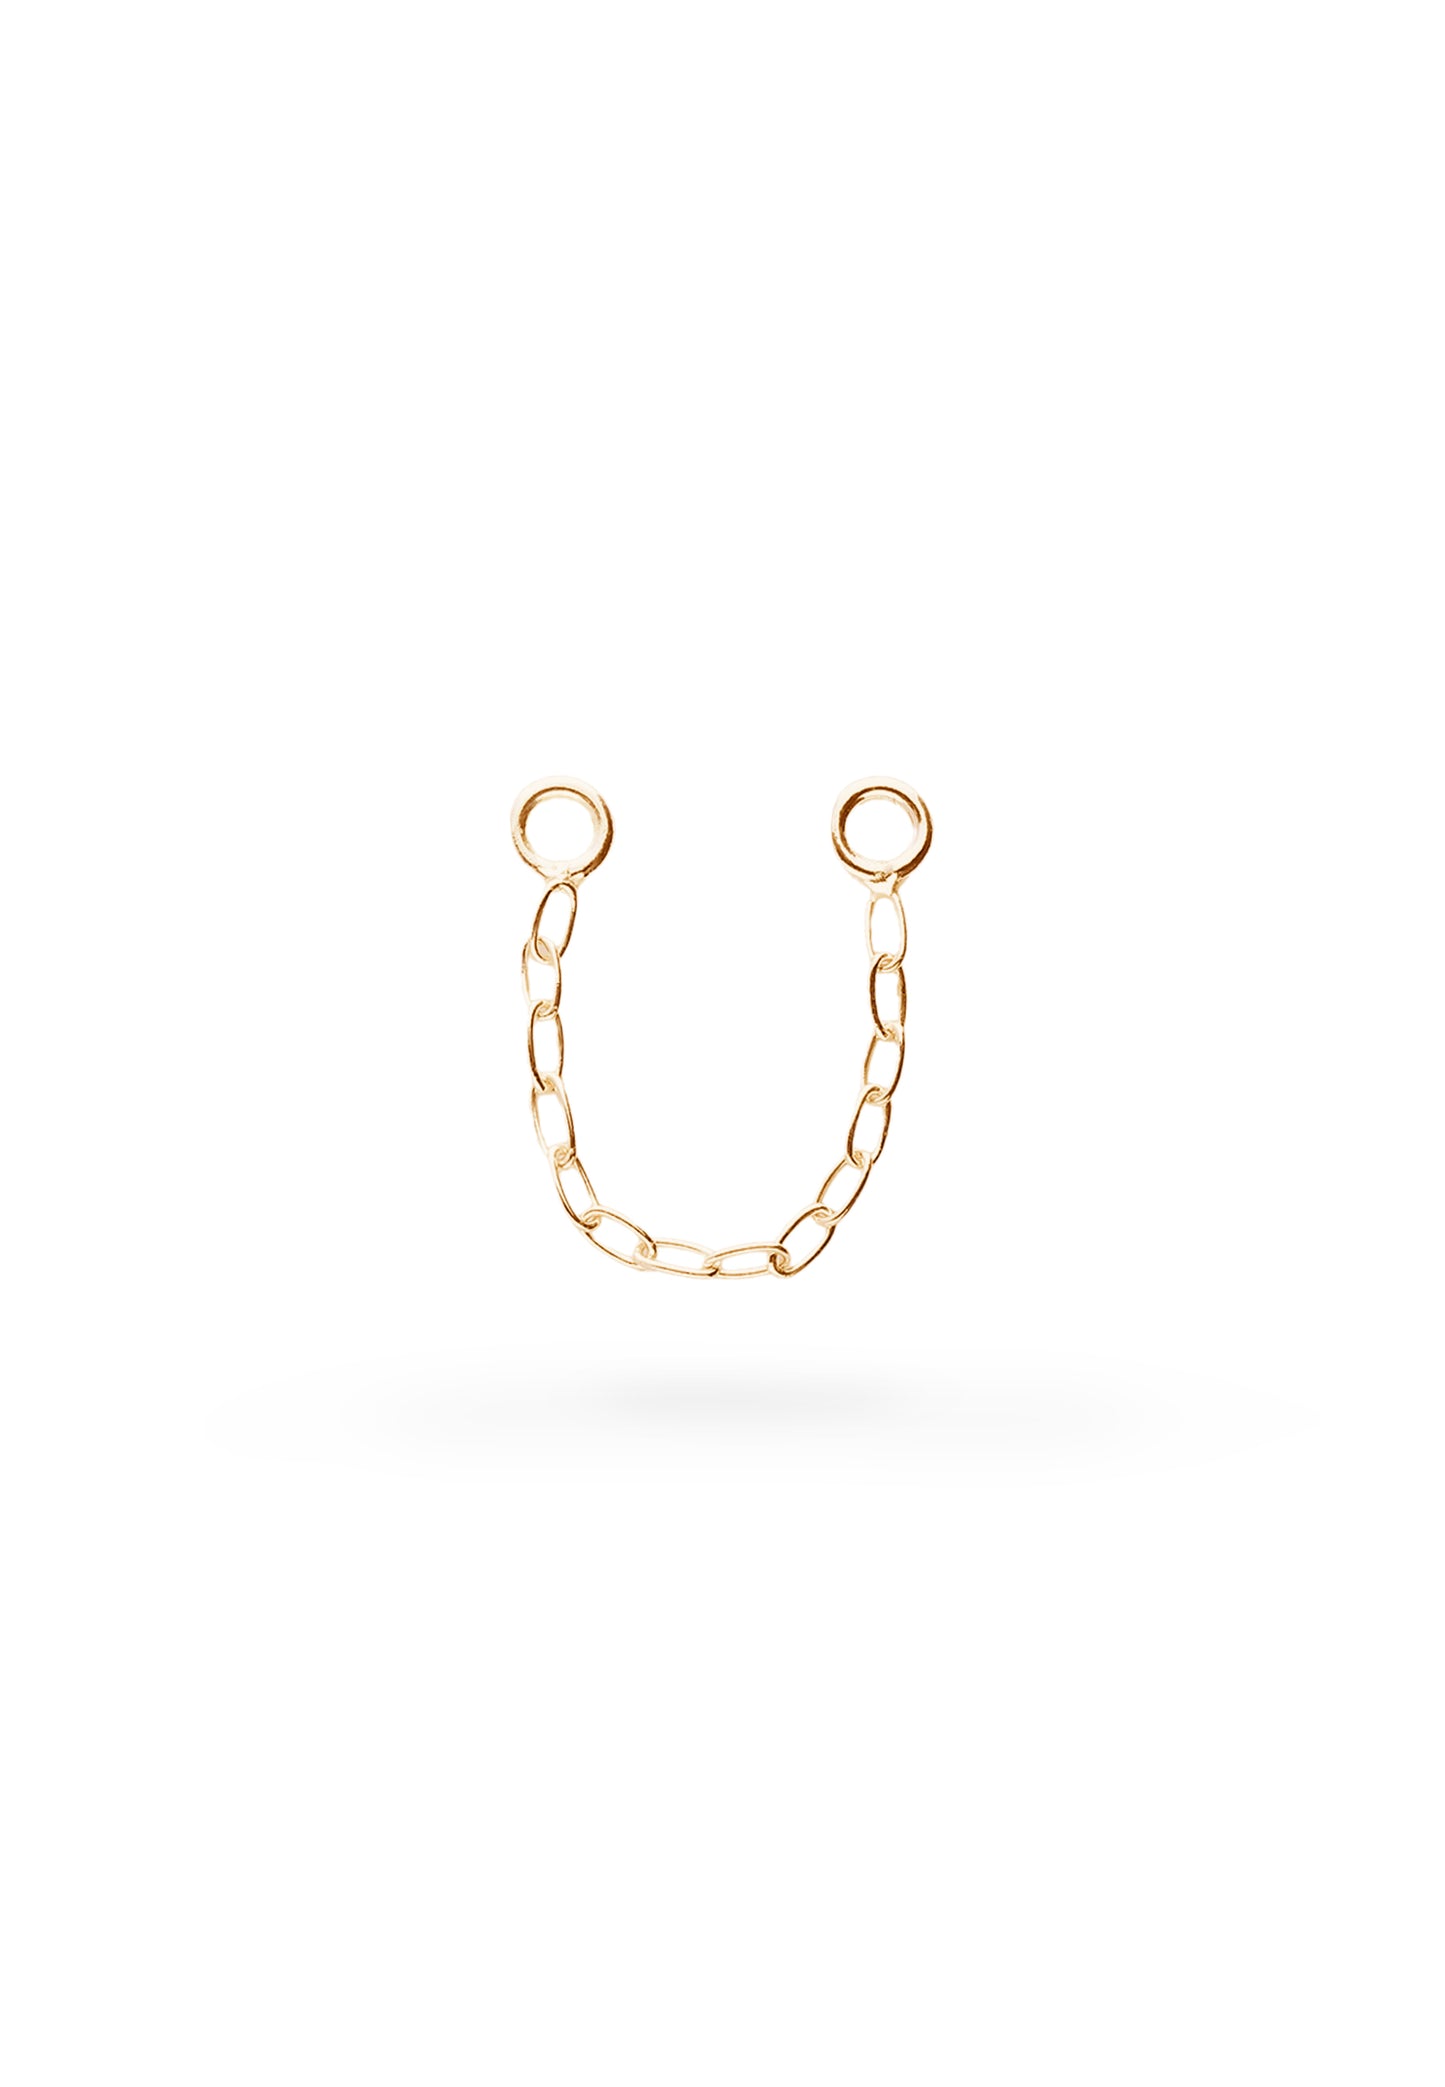 KETTE OHRRING ANCHOR GOLD